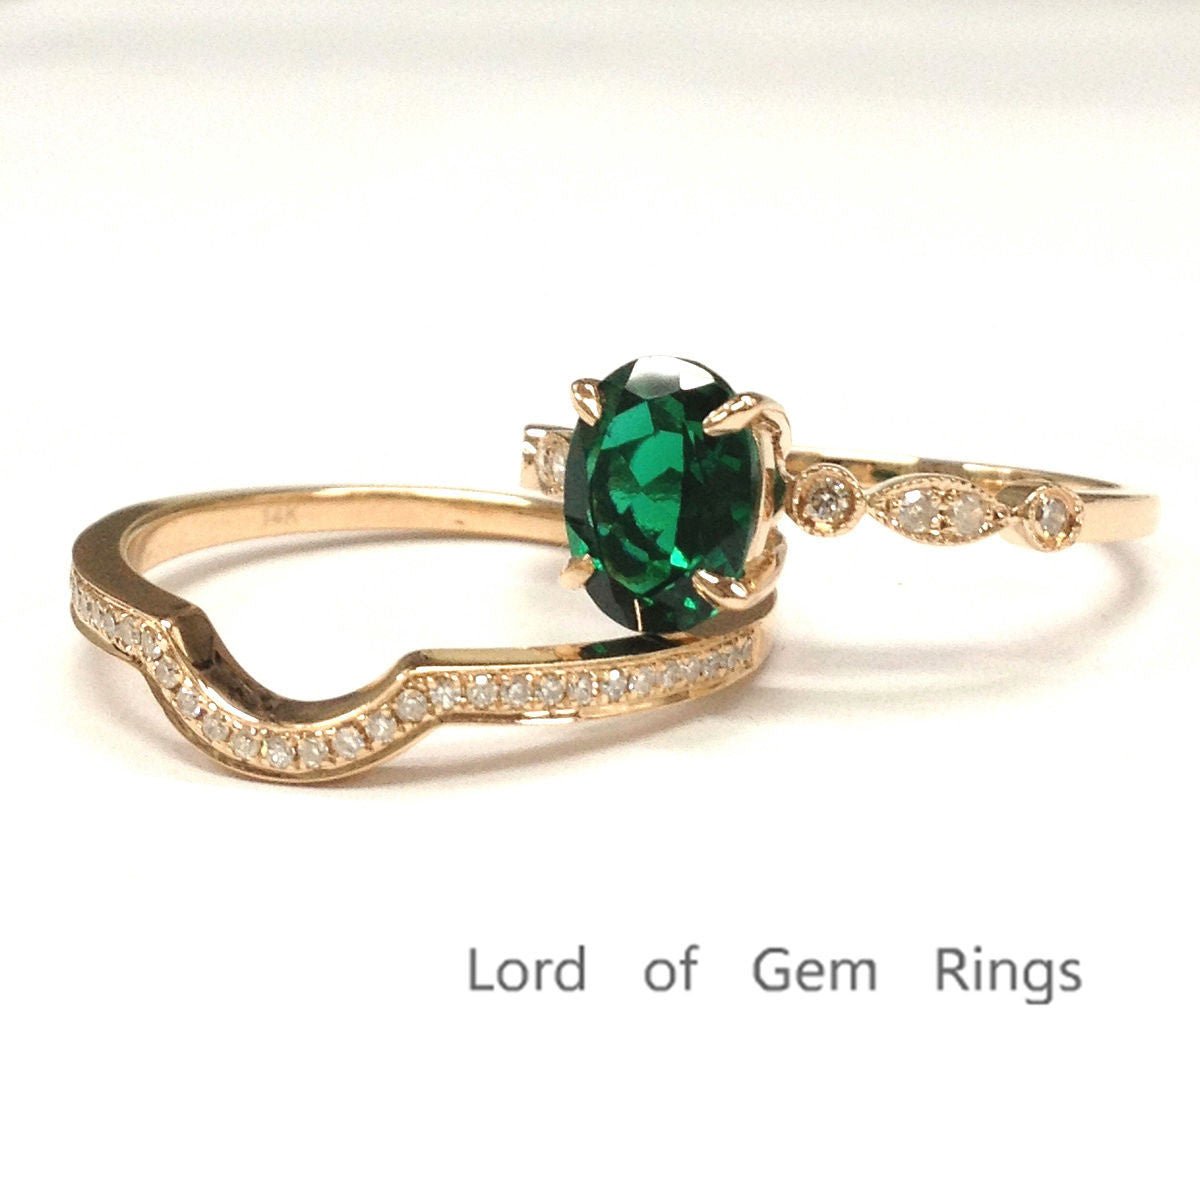 Oval Emerald Ring & Diamond Curved Band Bridal Set 14k Rose Gold - Lord of Gem Rings